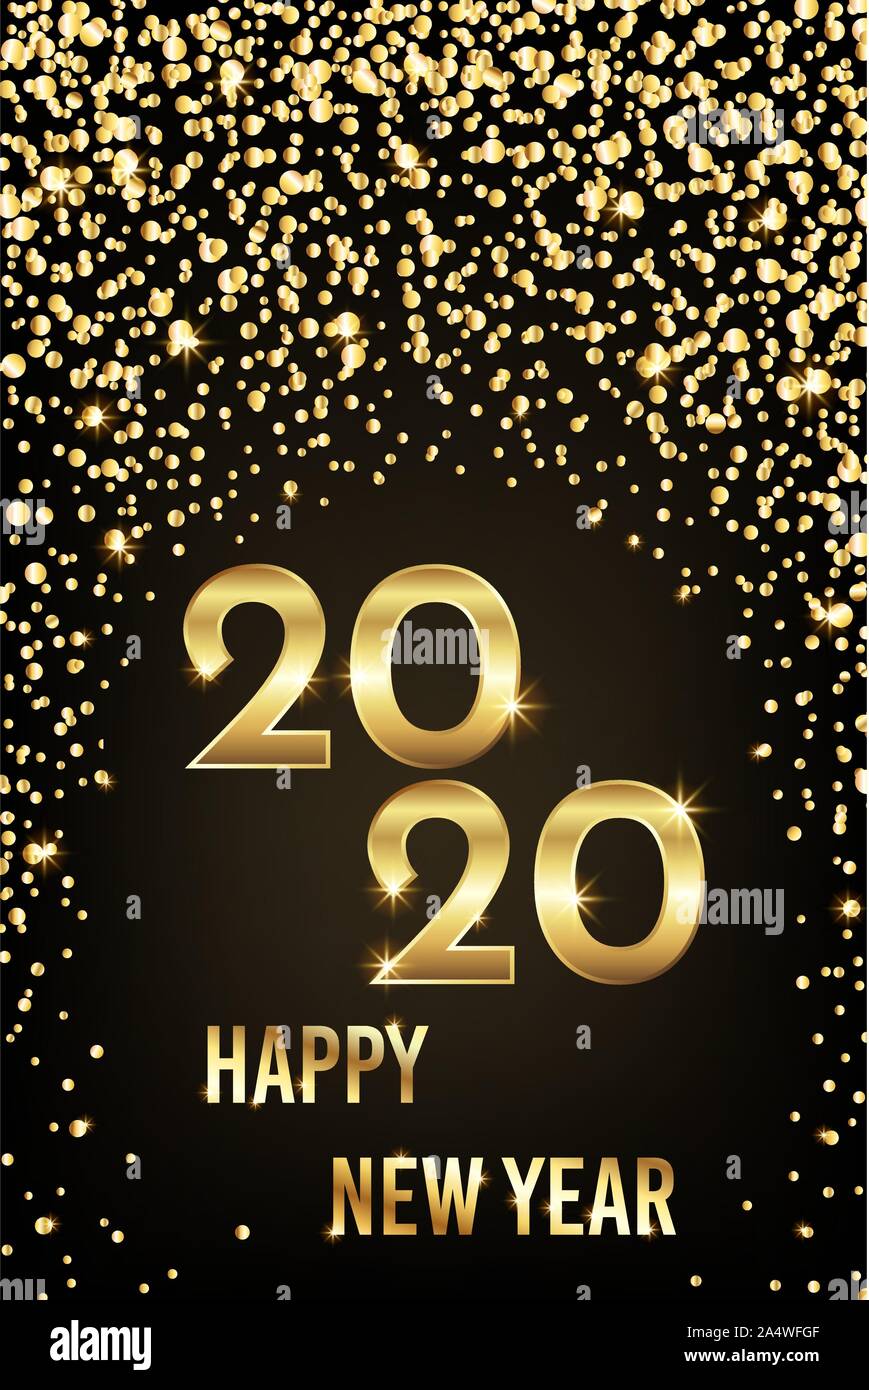 2020 happy new year congratulation with gold sparkles and text Stock Vector